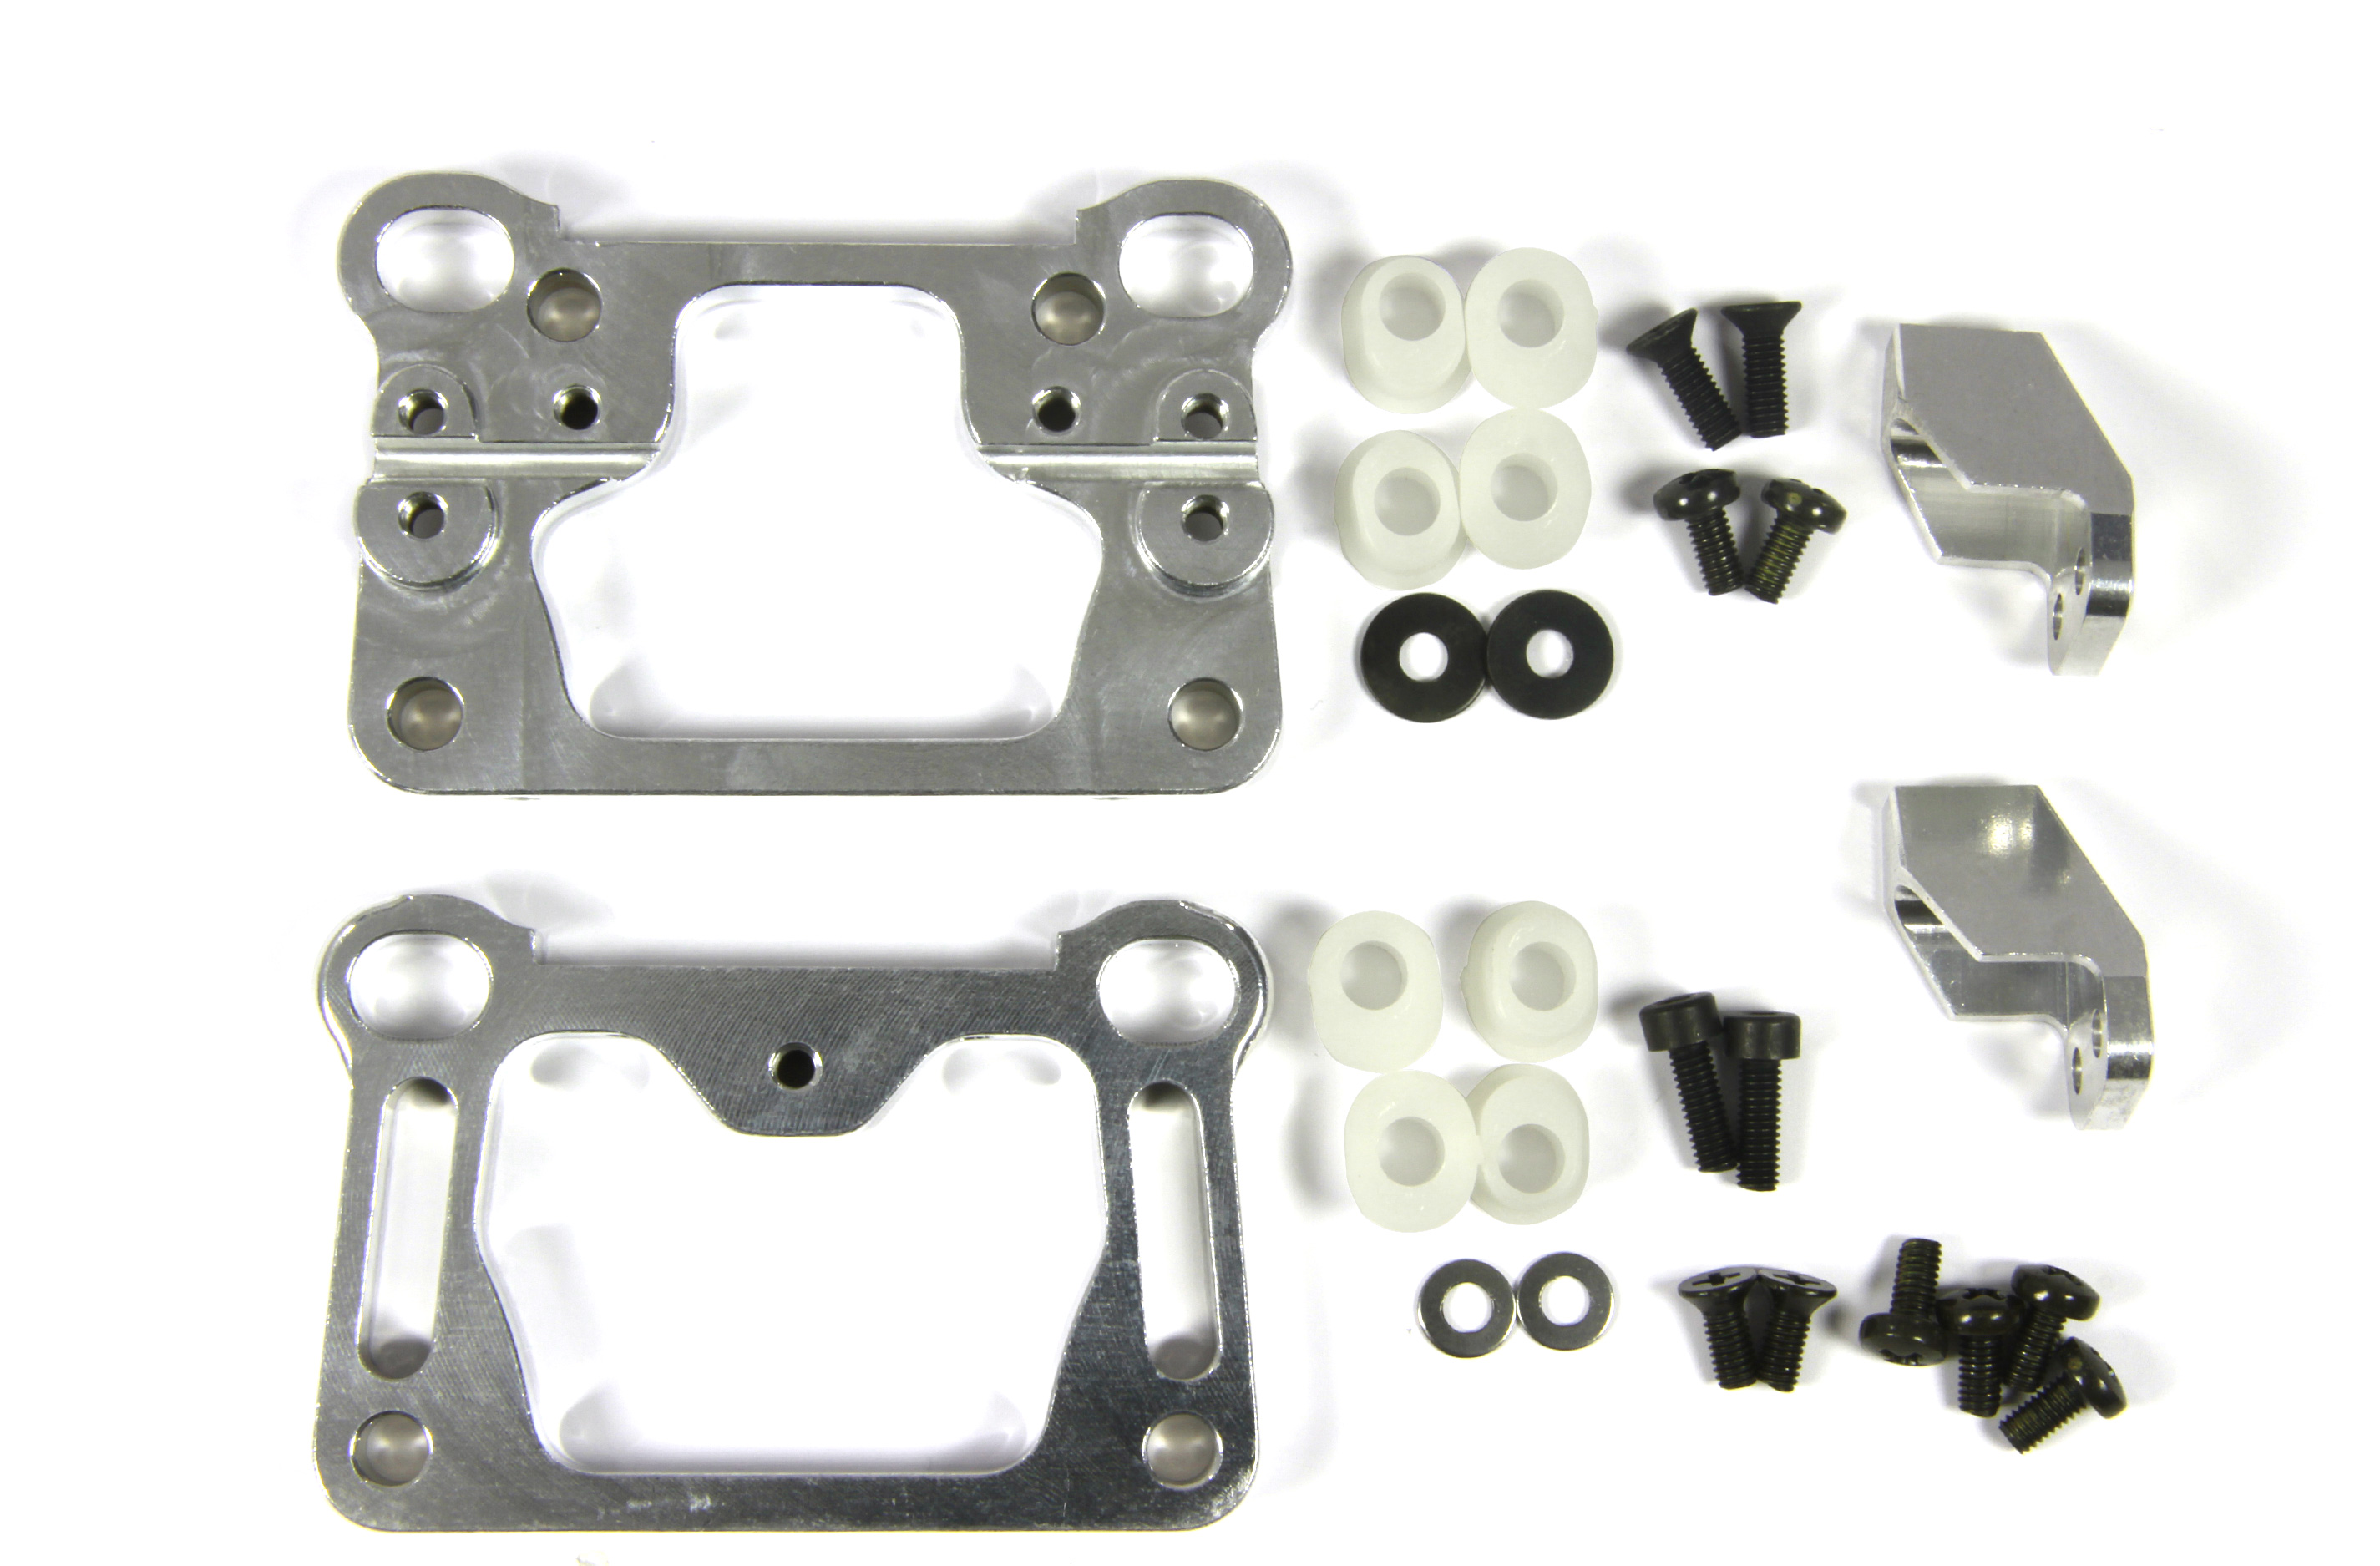 y1079 HT Aluminum front bulkhead A + B + droop stops for 2WD